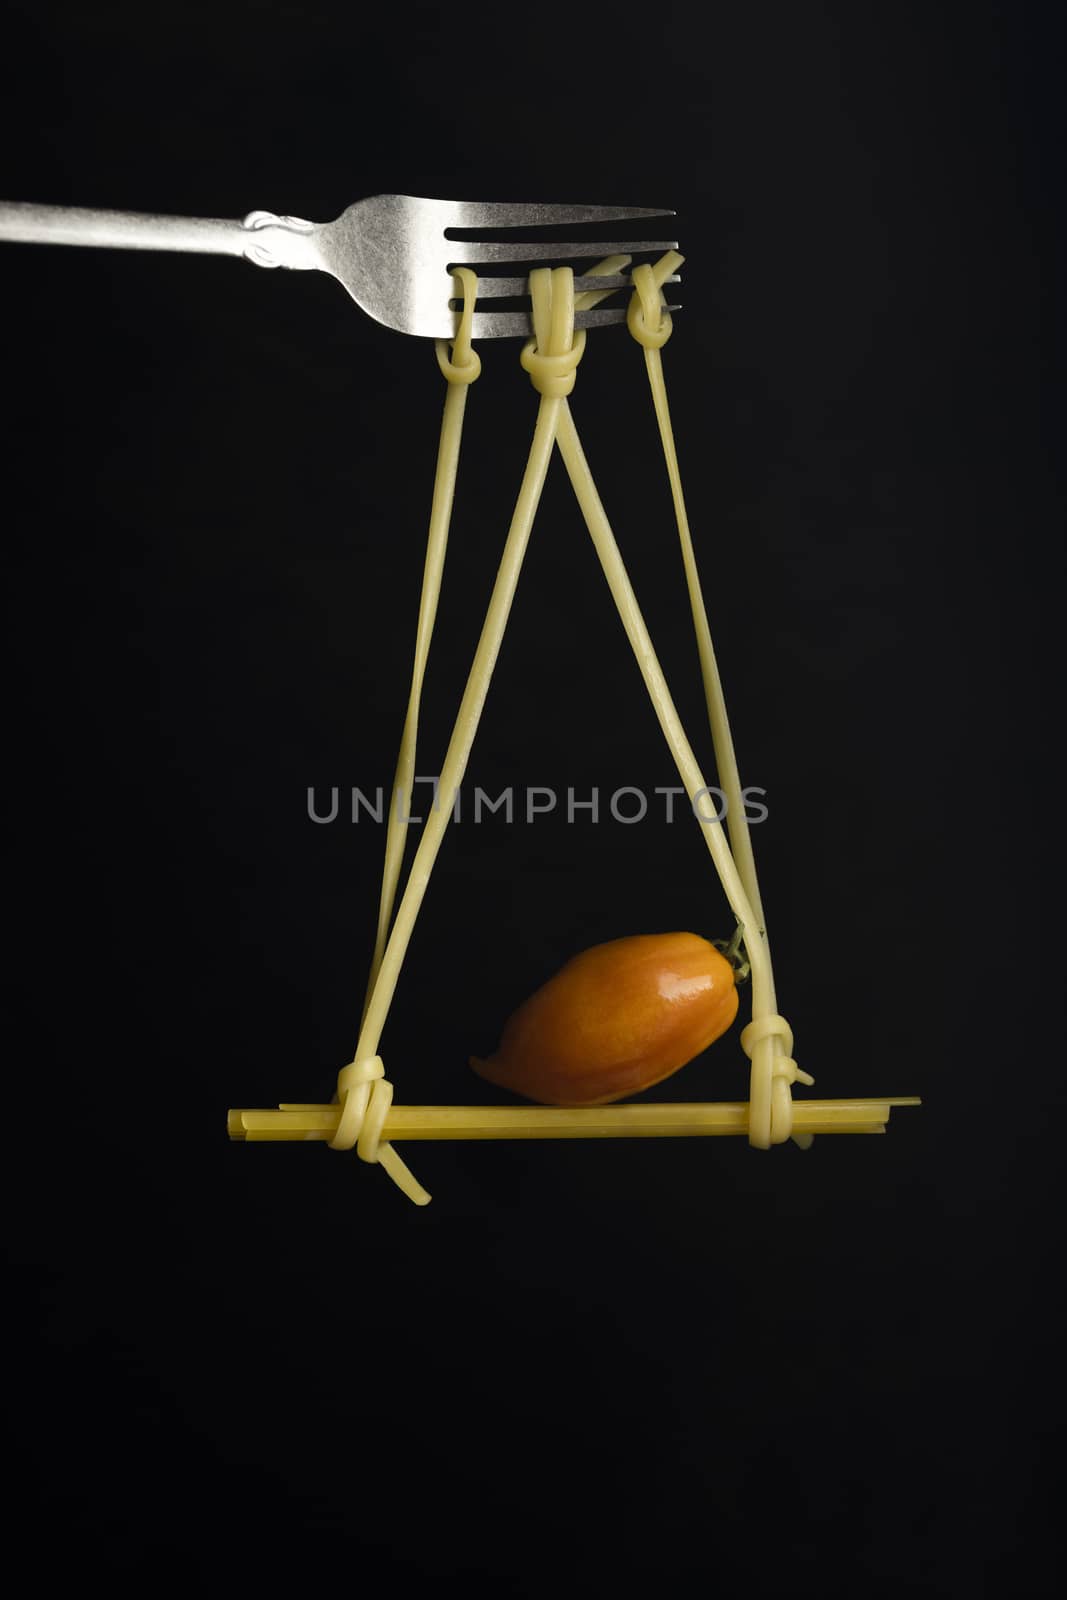 Spaghetti on a fork in front of black background. Swing from spaghetti by sashokddt